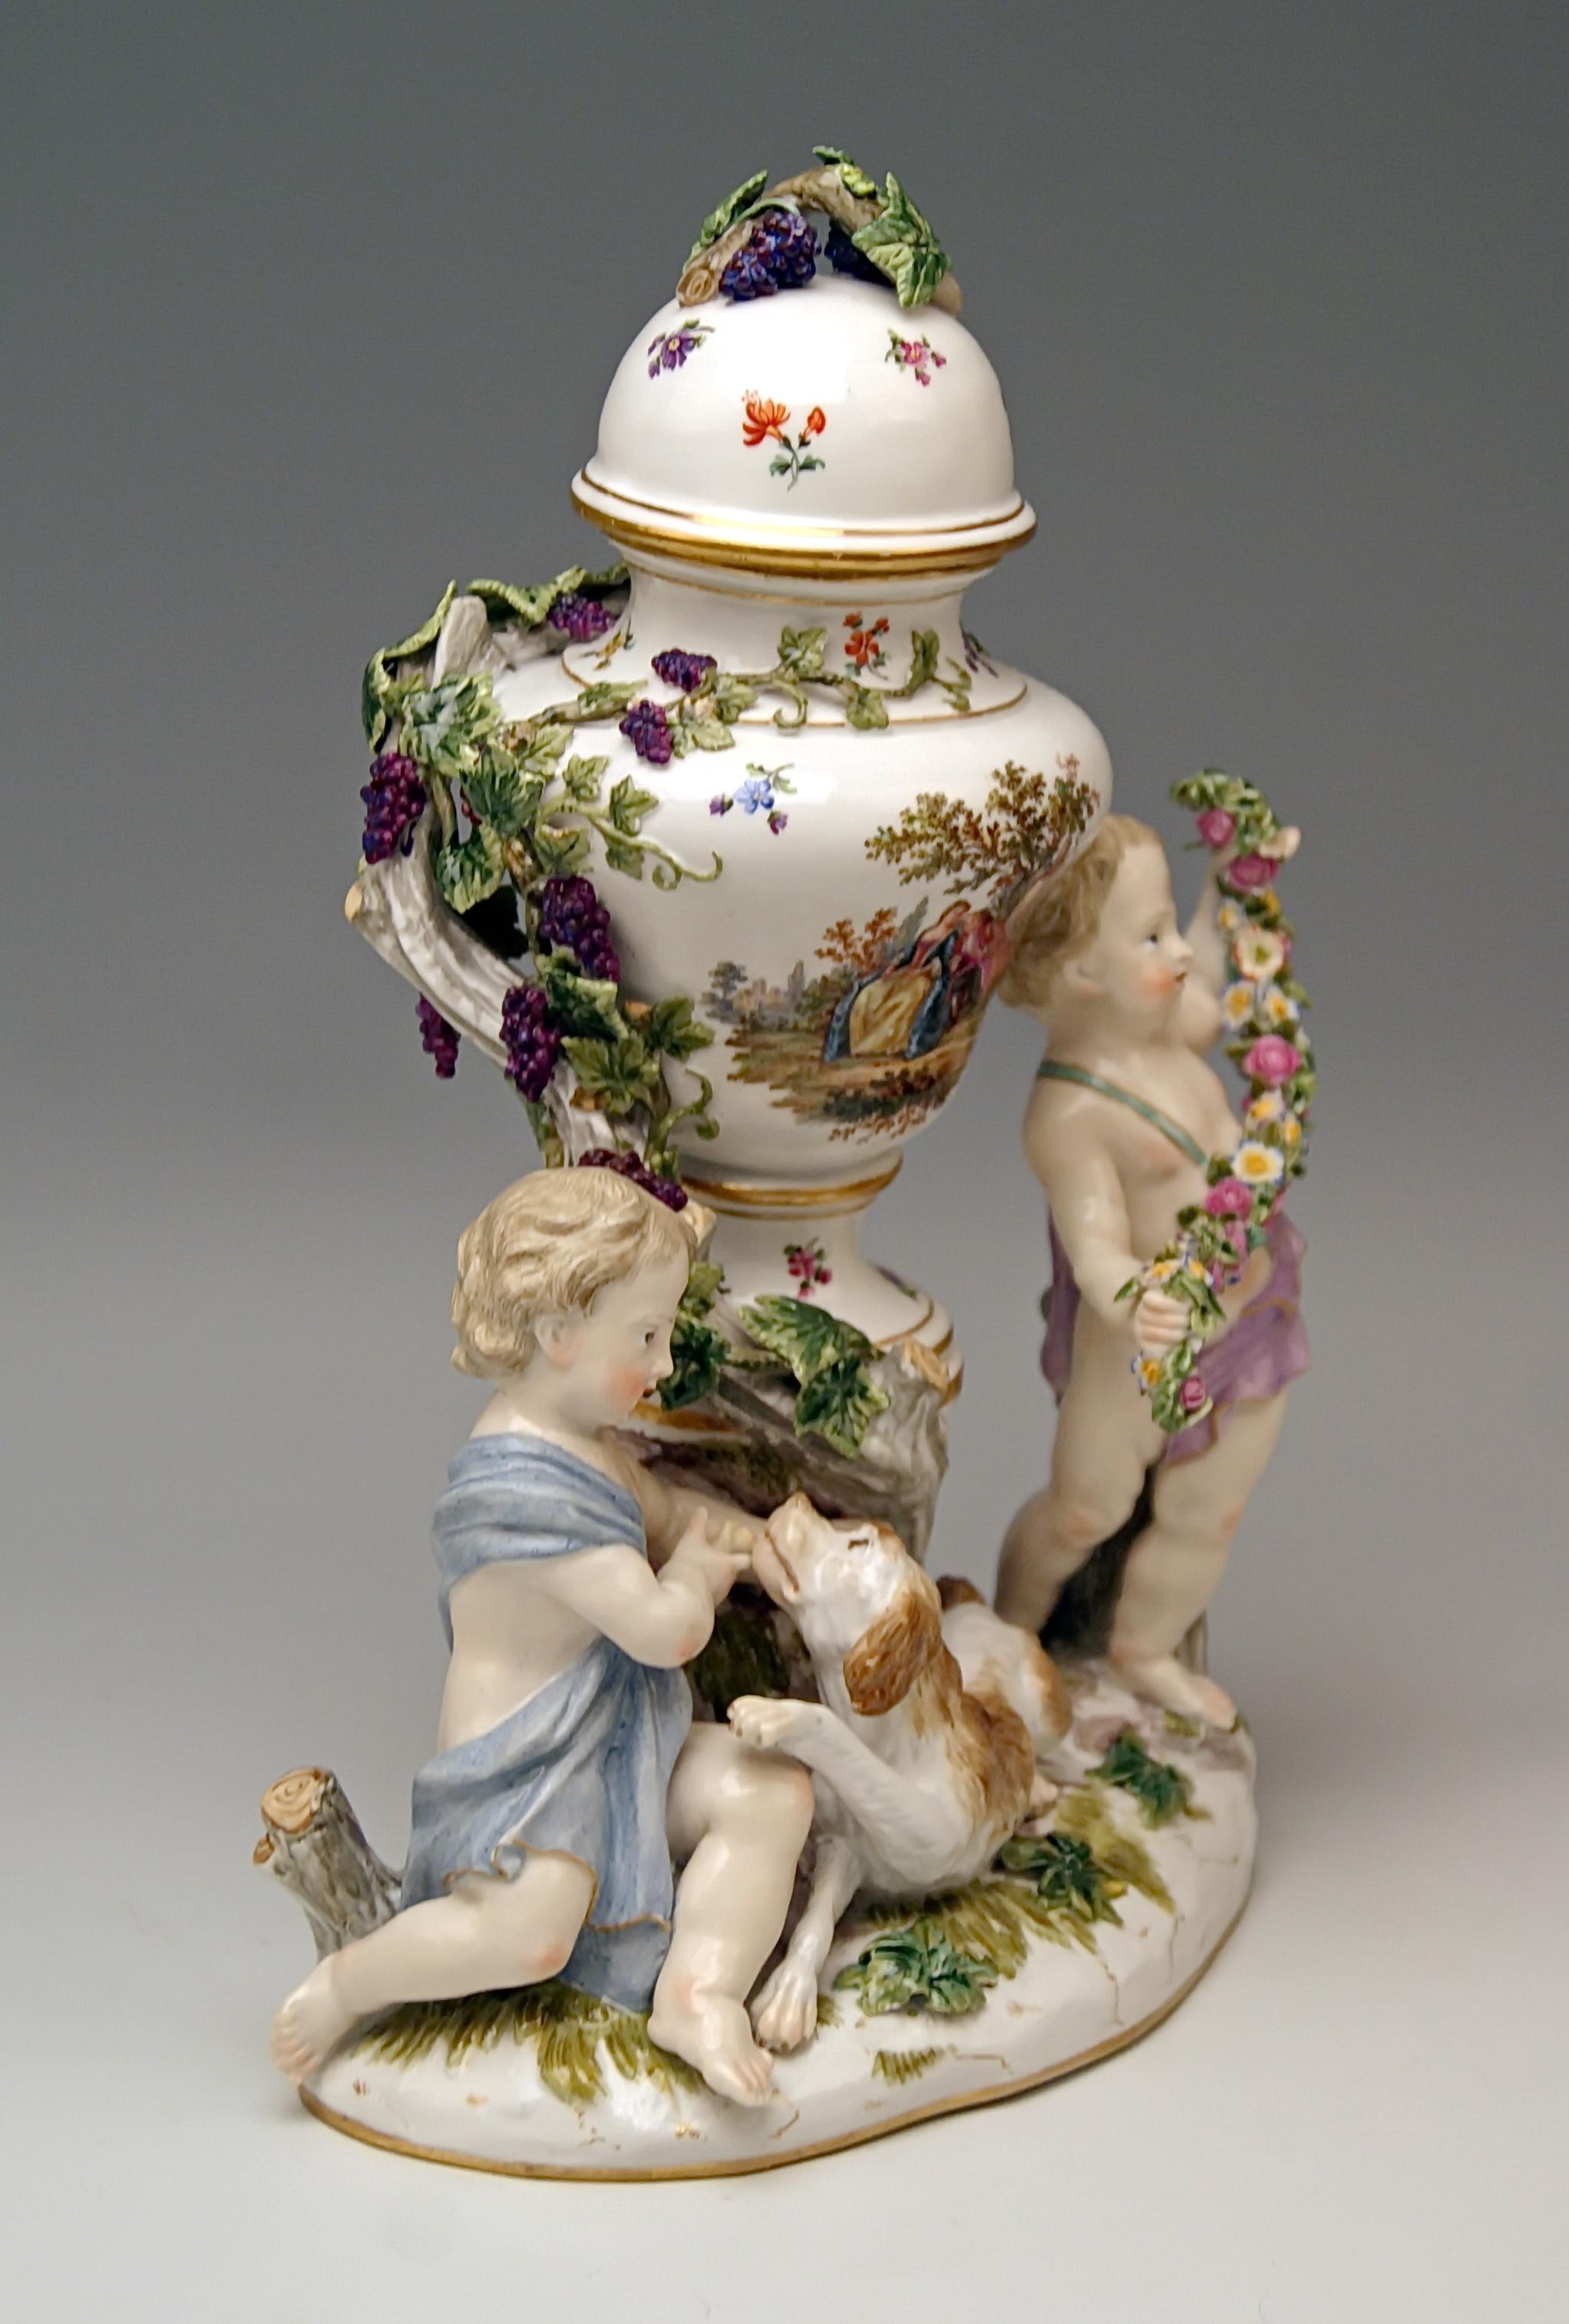 Meissen most lovely pair of cherubs with lidded urn vase. 

Size:
Total height 10.23 inches / 26.0 cm
Total width 6.49 inches / 16.5 cm
Depth 3.93 inches / 10.0 cm

Manufactory: Meissen
Hallmarked: Blue Meissen Sword Mark of first half of